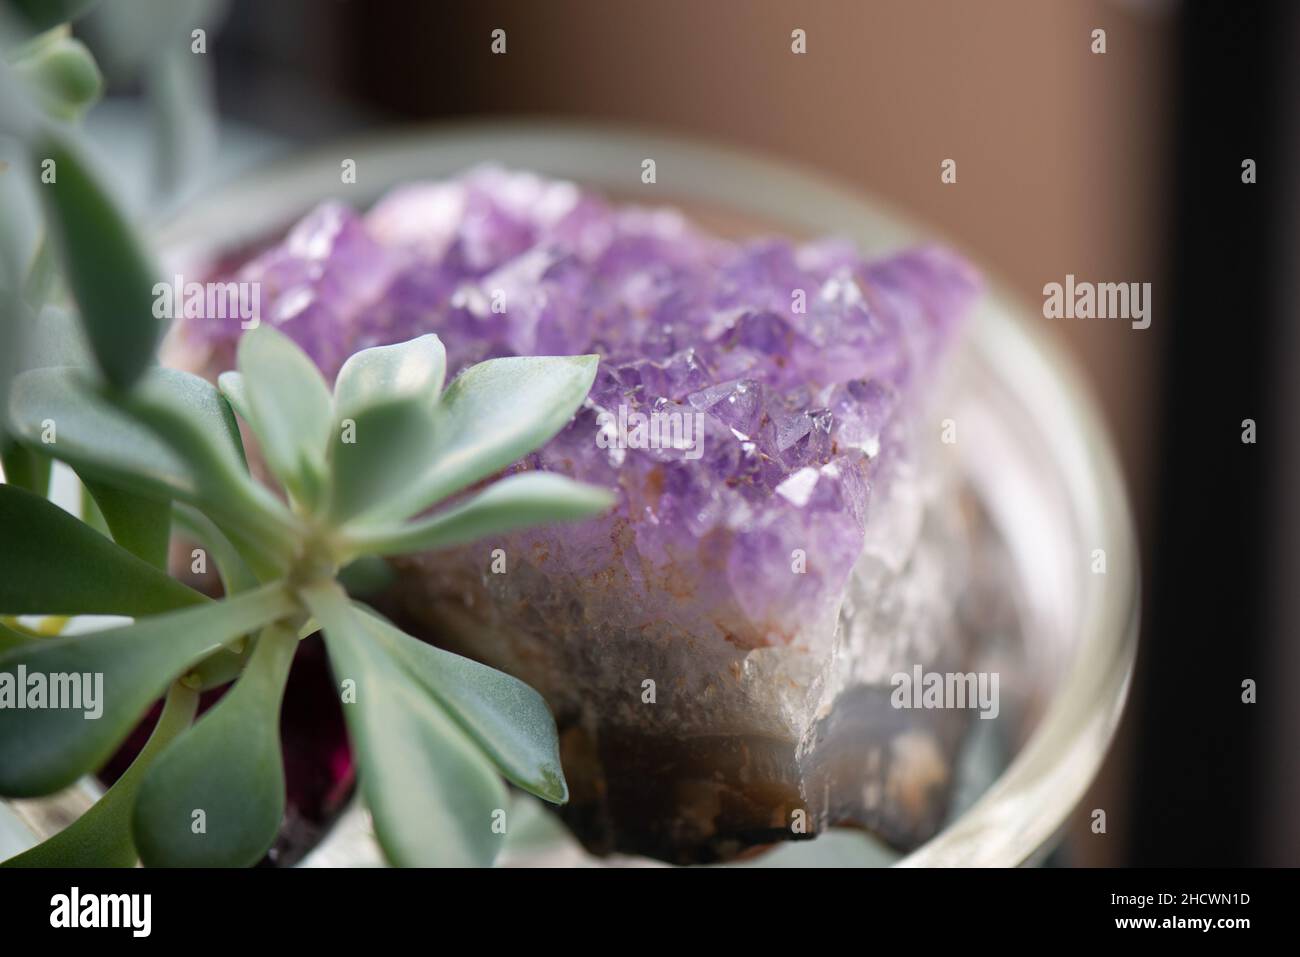 Succulent with amethyst stone Stock Photo